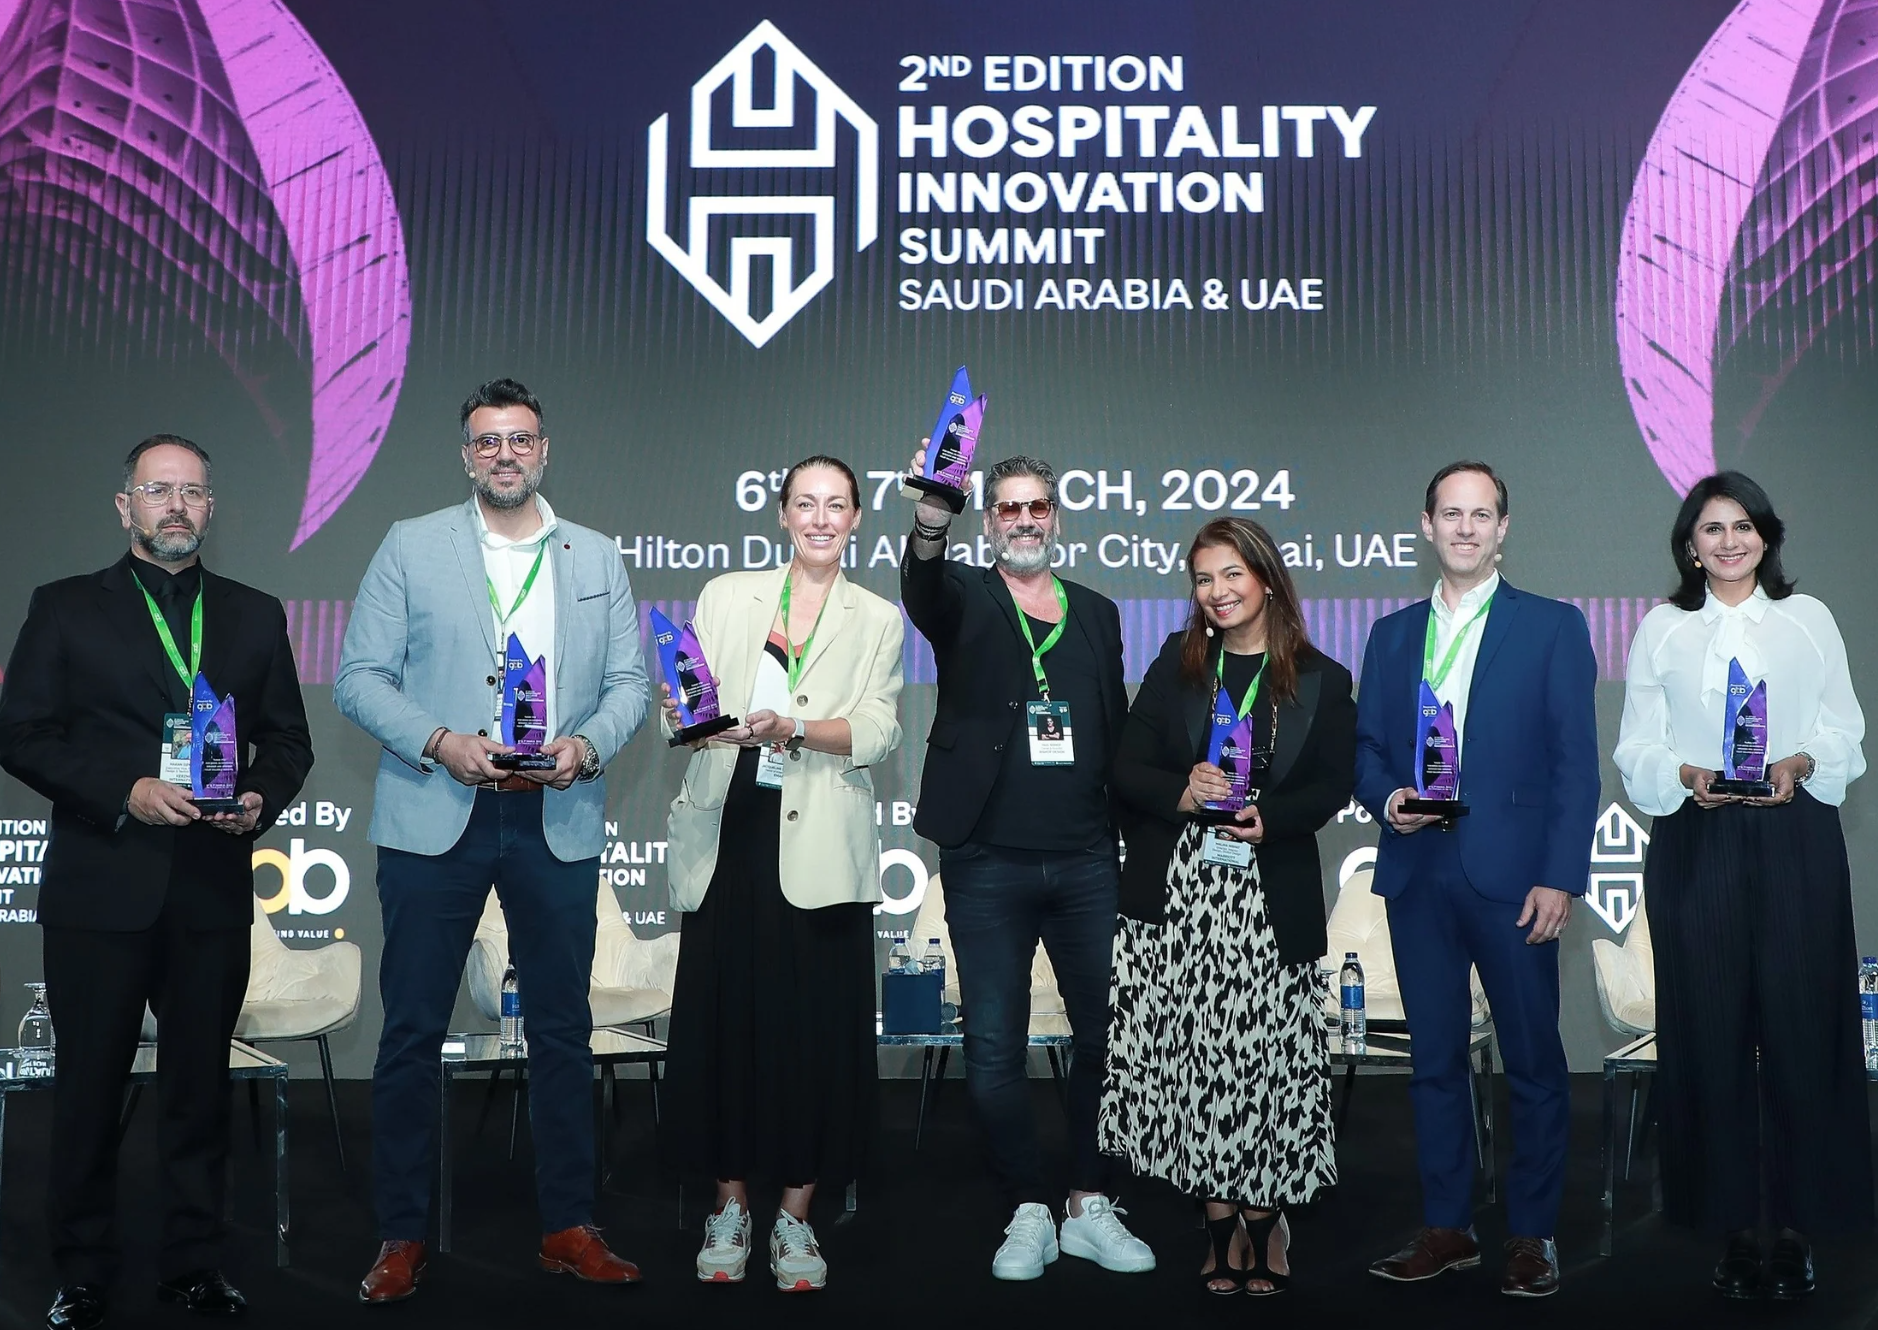 The 2nd Edition Hospitality Innovation Summit Saudi Arabia & UAE by GBB Venture marks a new measure of excellence